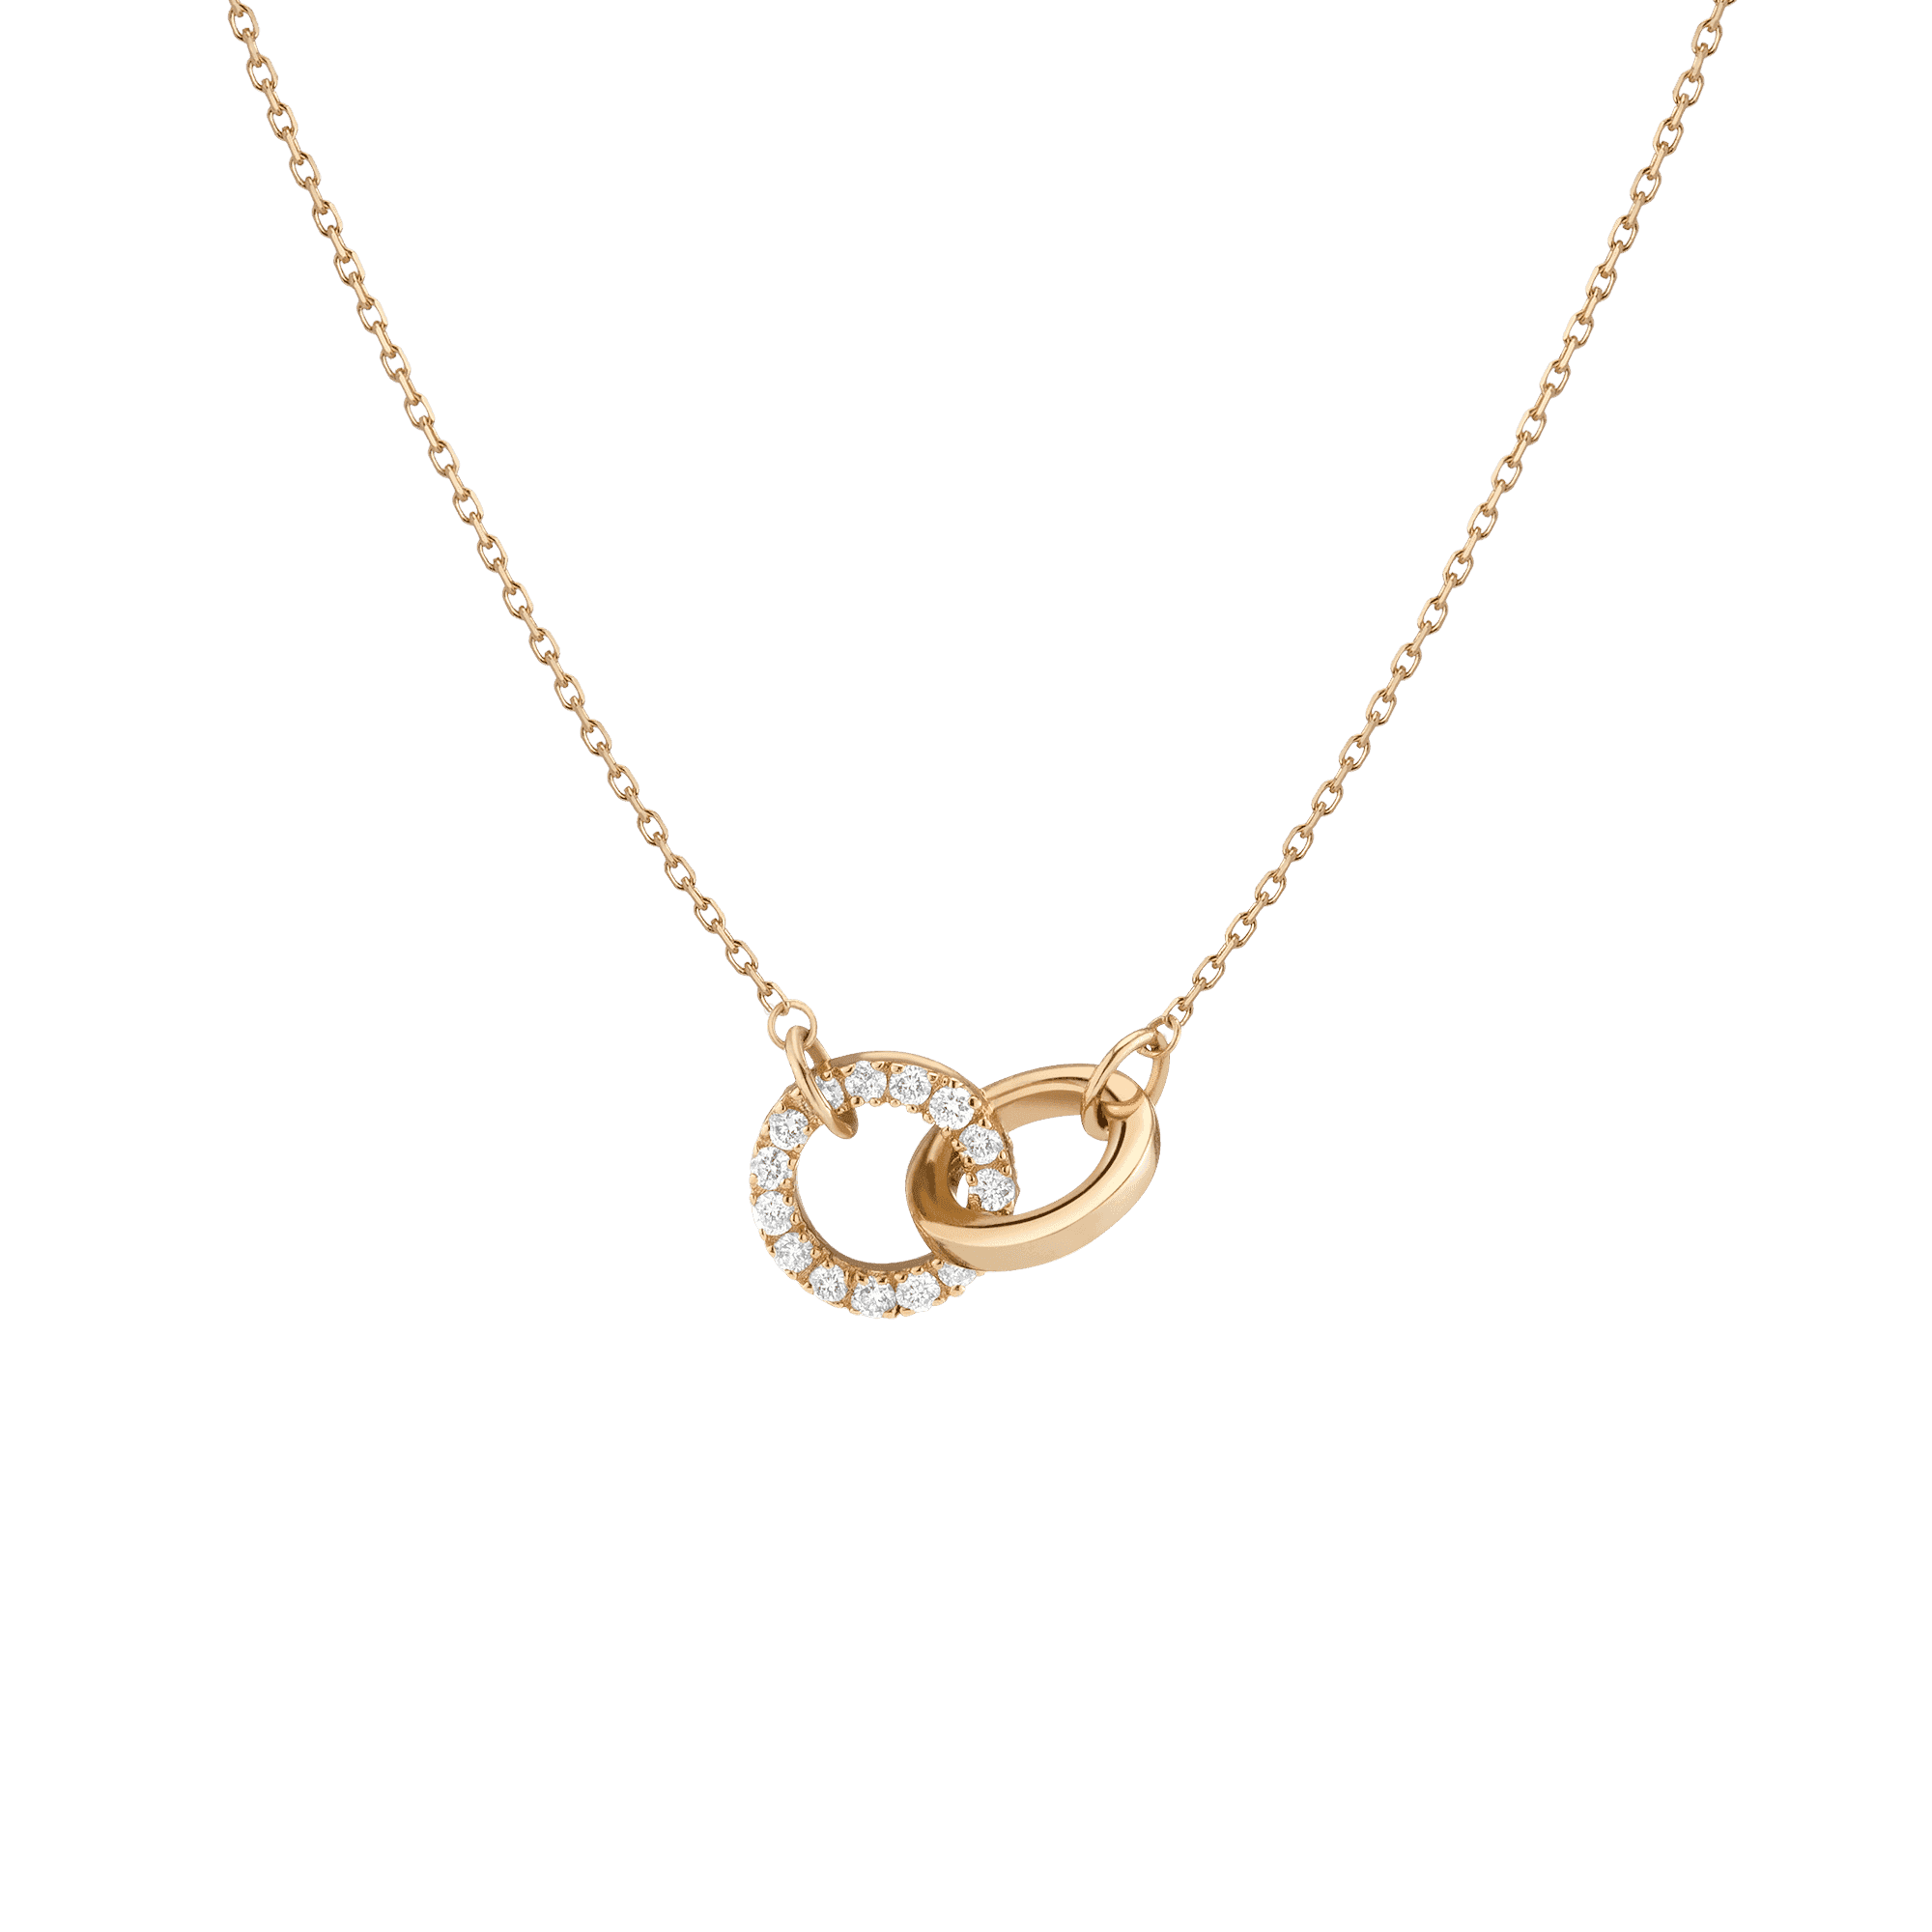 Aurate New York Diamond Connection Necklace, 14K White Gold